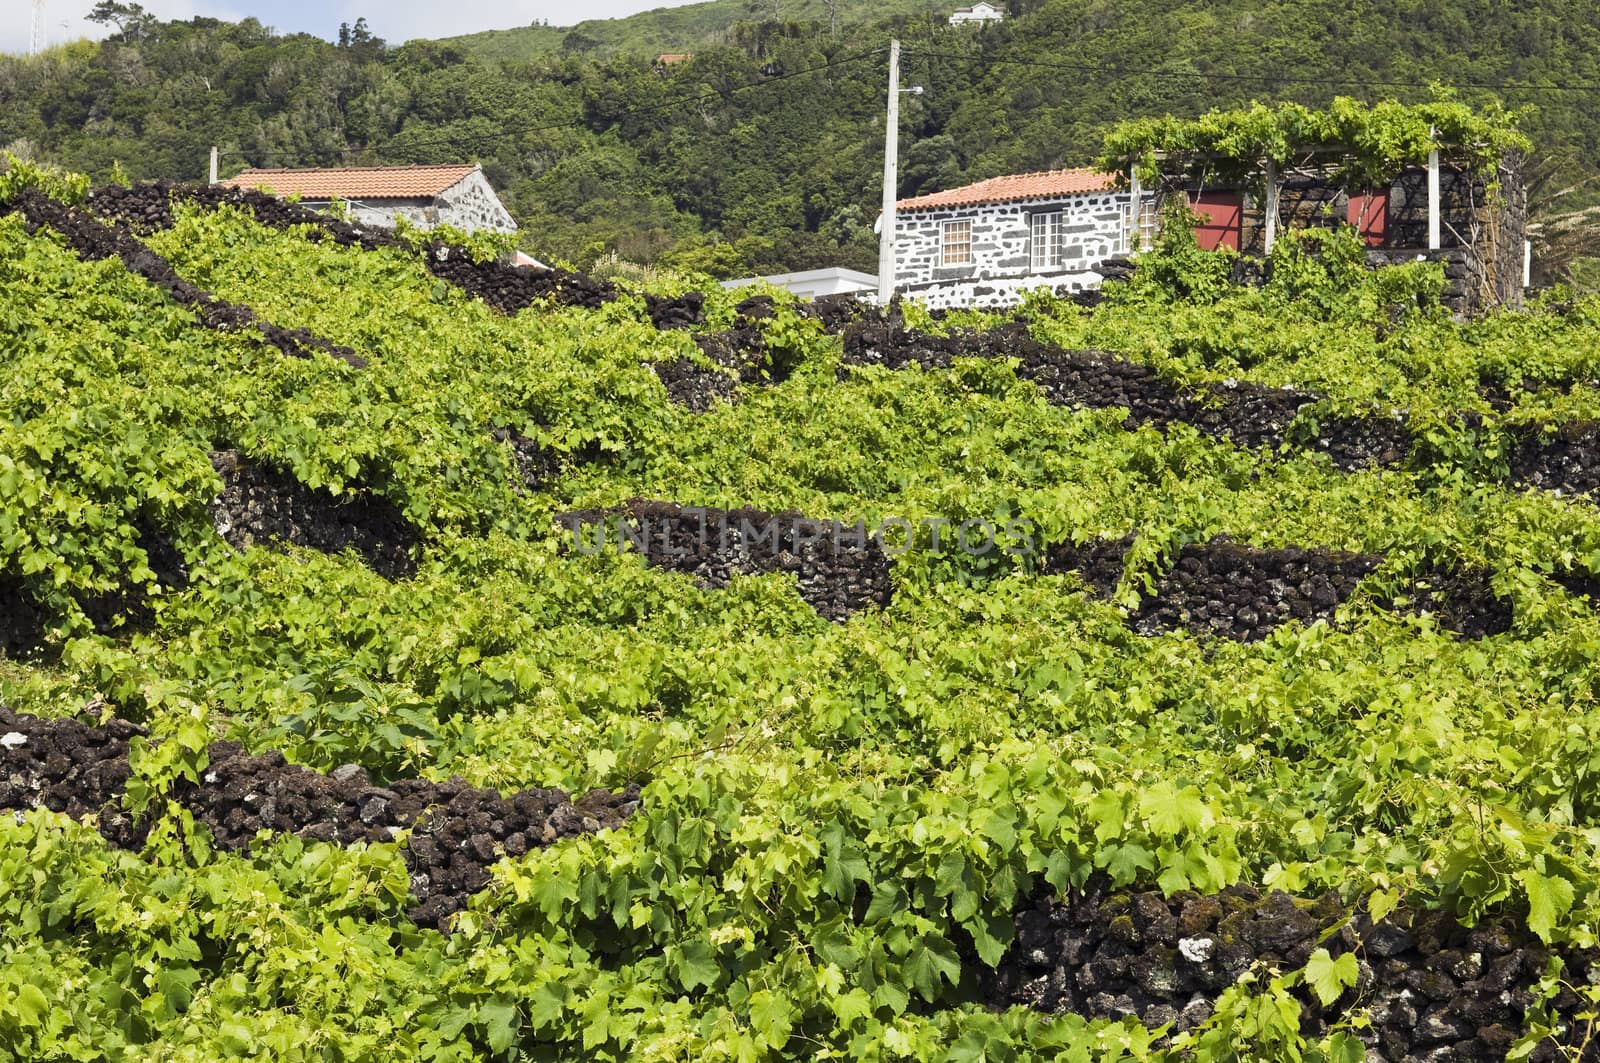 Traditional vineyards of Pico Island, Azores, Portugal